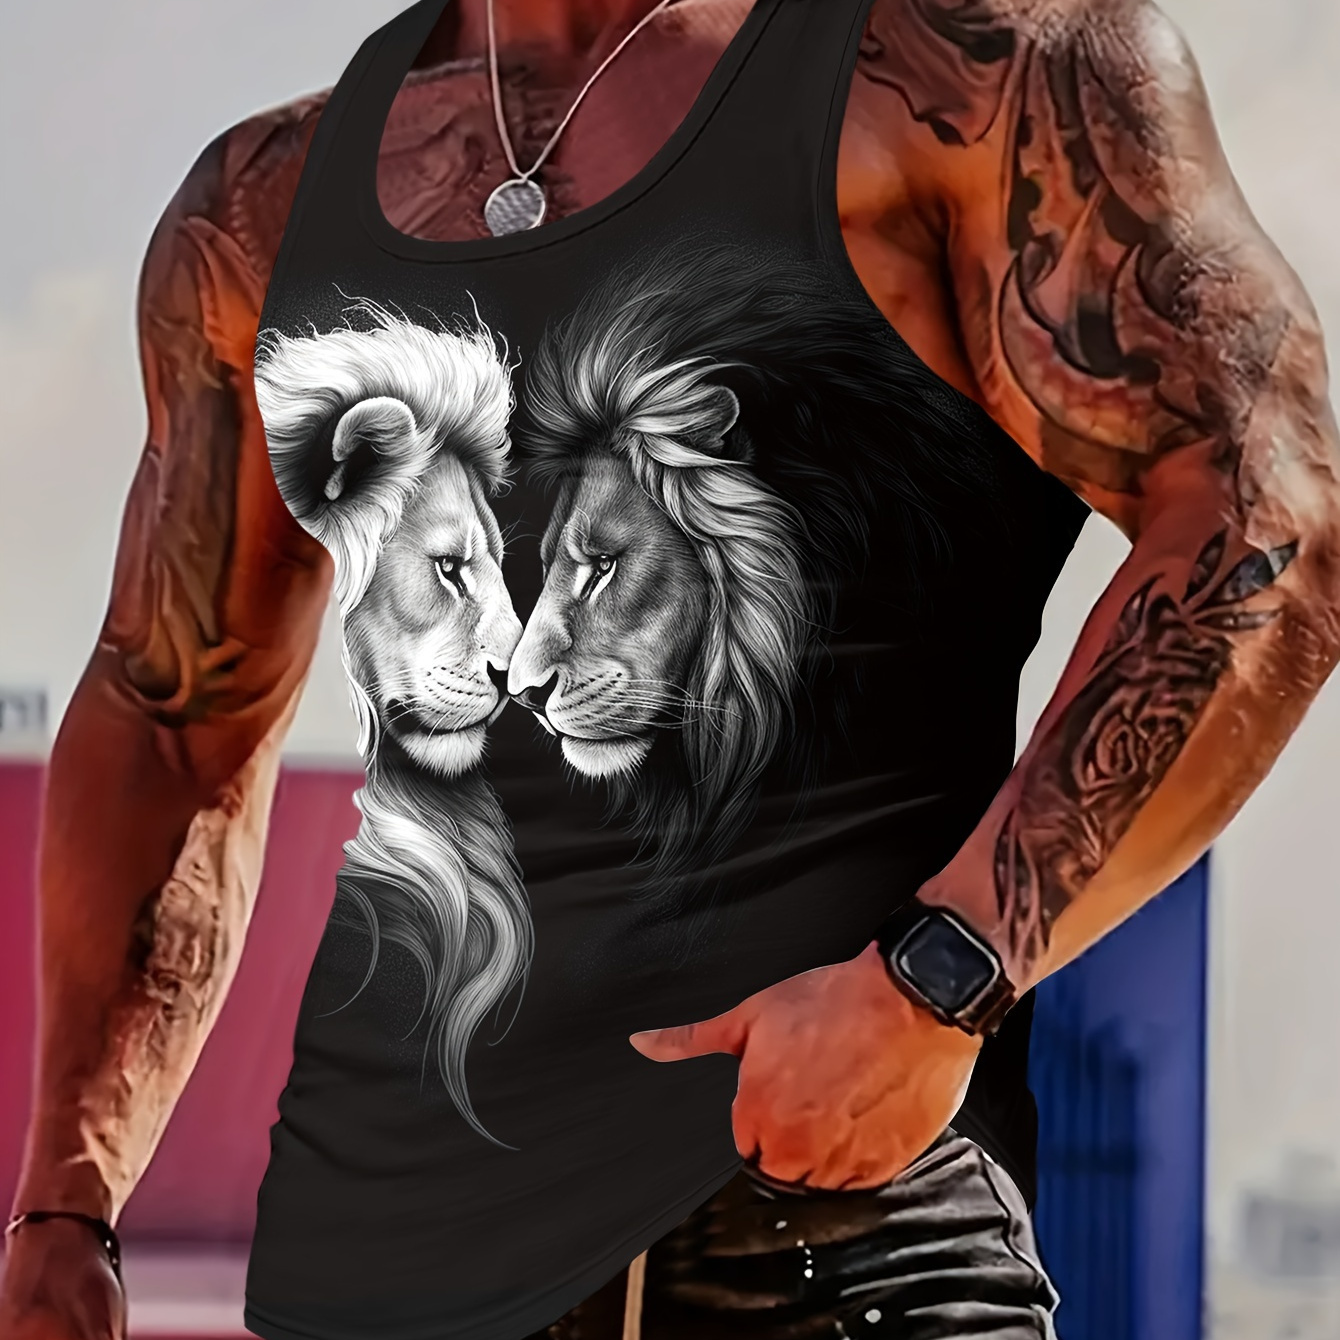 

Men's Trendy Crew Neck Graphic Tank Top With Fancy Lion Prints, Street Style For Summer Wear